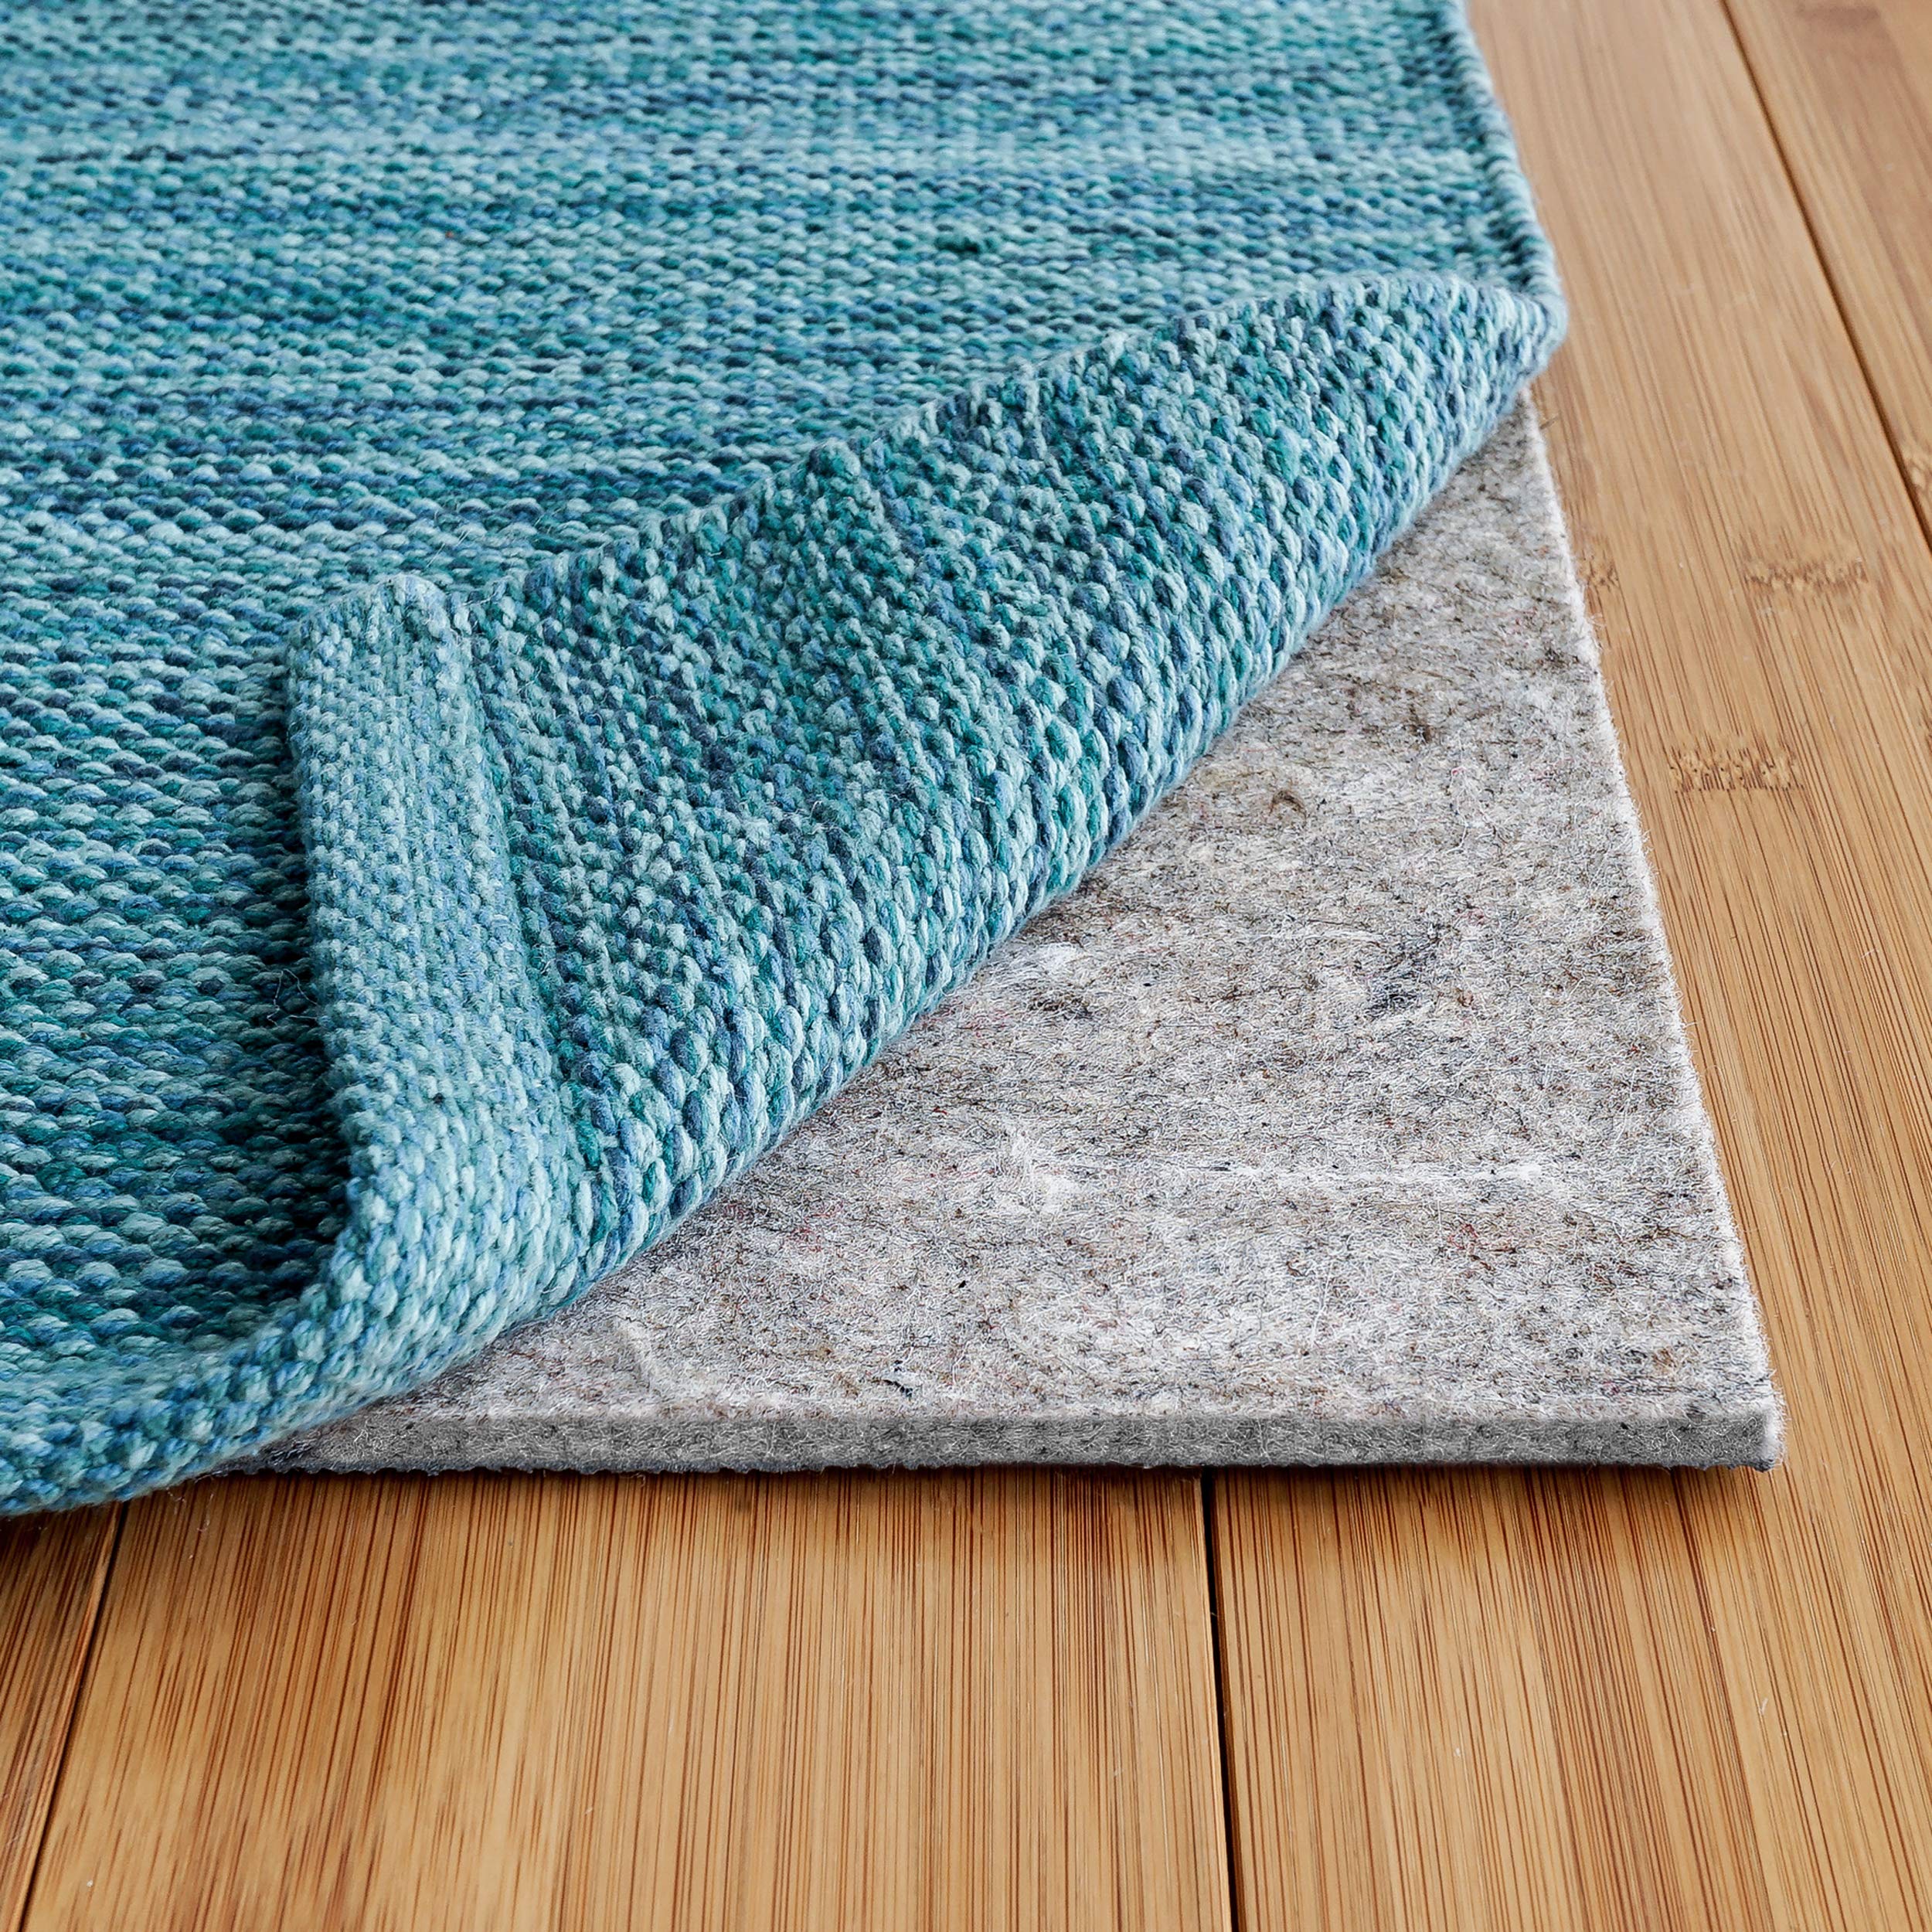 RUGPADUSA - Basics - 2'x6' - 1/4" Thick - Felt + Rubber - Non-Slip Rug Pad - Cushioning Felt for Added Comfort - Safe for All Floors and Finishes